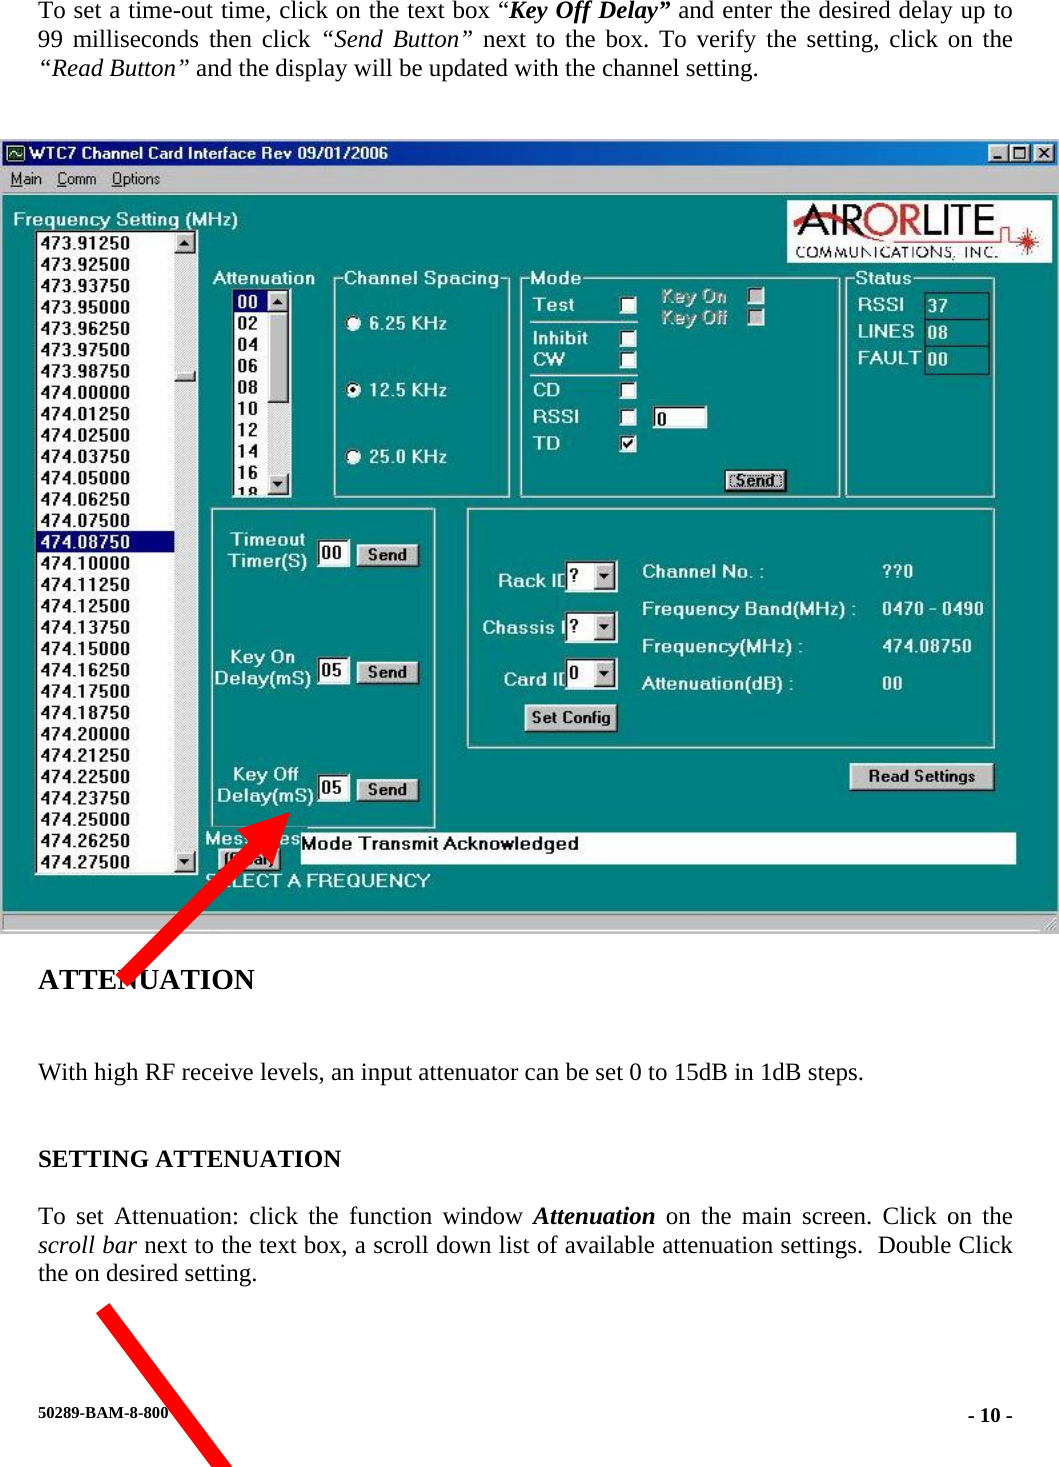  To set a time-out time, click on the text box “Key Off Delay” and enter the desired delay up to 99 milliseconds then click “Send Button” next to the box. To verify the setting, click on the “Read Button” and the display will be updated with the channel setting.     ATTENUATION  With high RF receive levels, an input attenuator can be set 0 to 15dB in 1dB steps.   SETTING ATTENUATION  To set Attenuation: click the function window Attenuation on the main screen. Click on the scroll bar next to the text box, a scroll down list of available attenuation settings.  Double Click the on desired setting.  50289-BAM-8-800  - 10 -